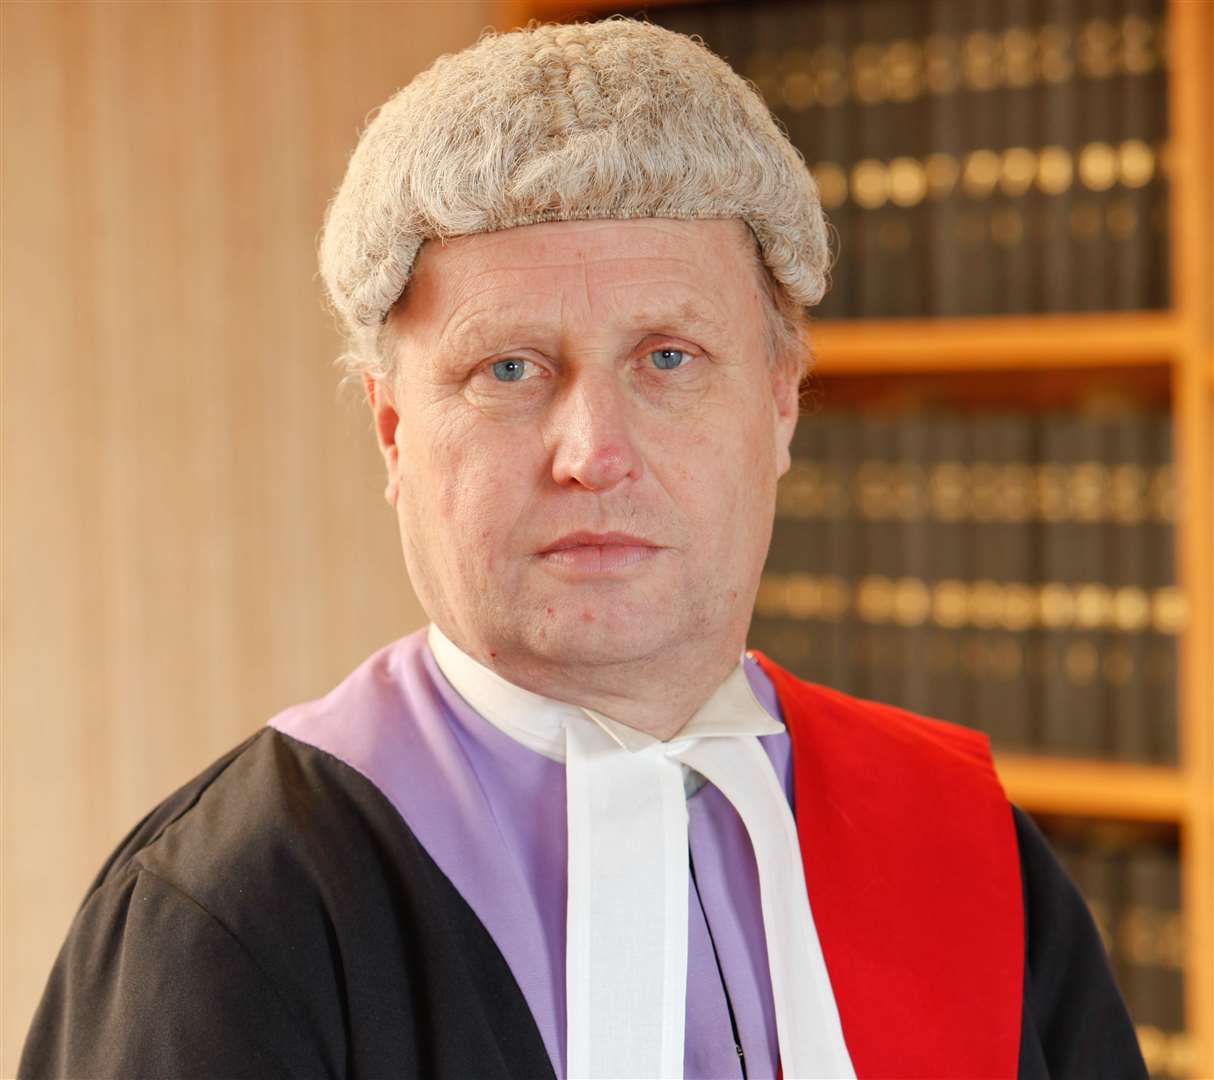 Judge Philip St John-Stevens said he believed the right verdict had been delivered